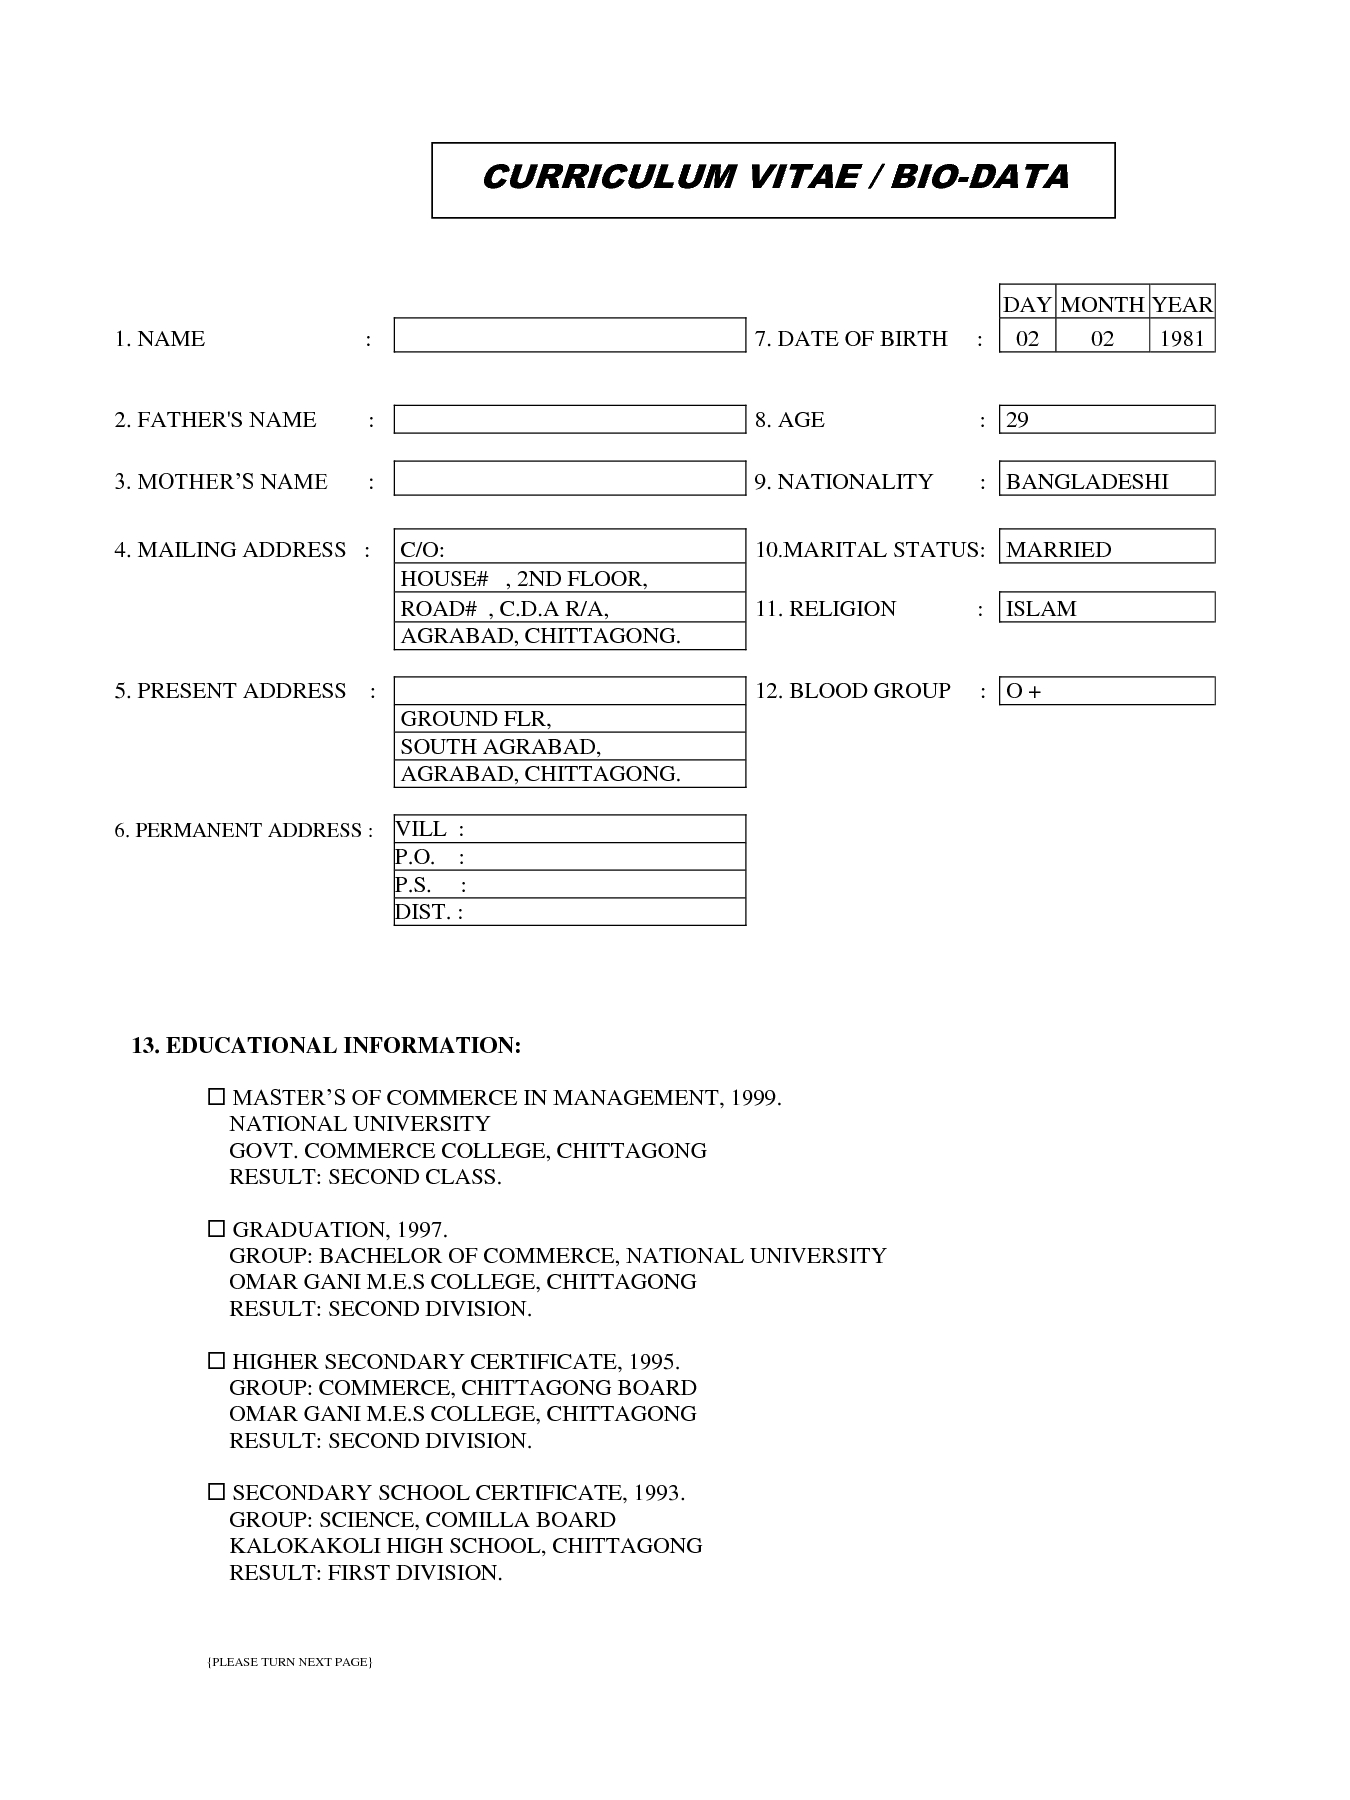 Work Experience Cv Template Year 10 Kjdsx1t2 Good Resume pertaining to size 1350 X 1800